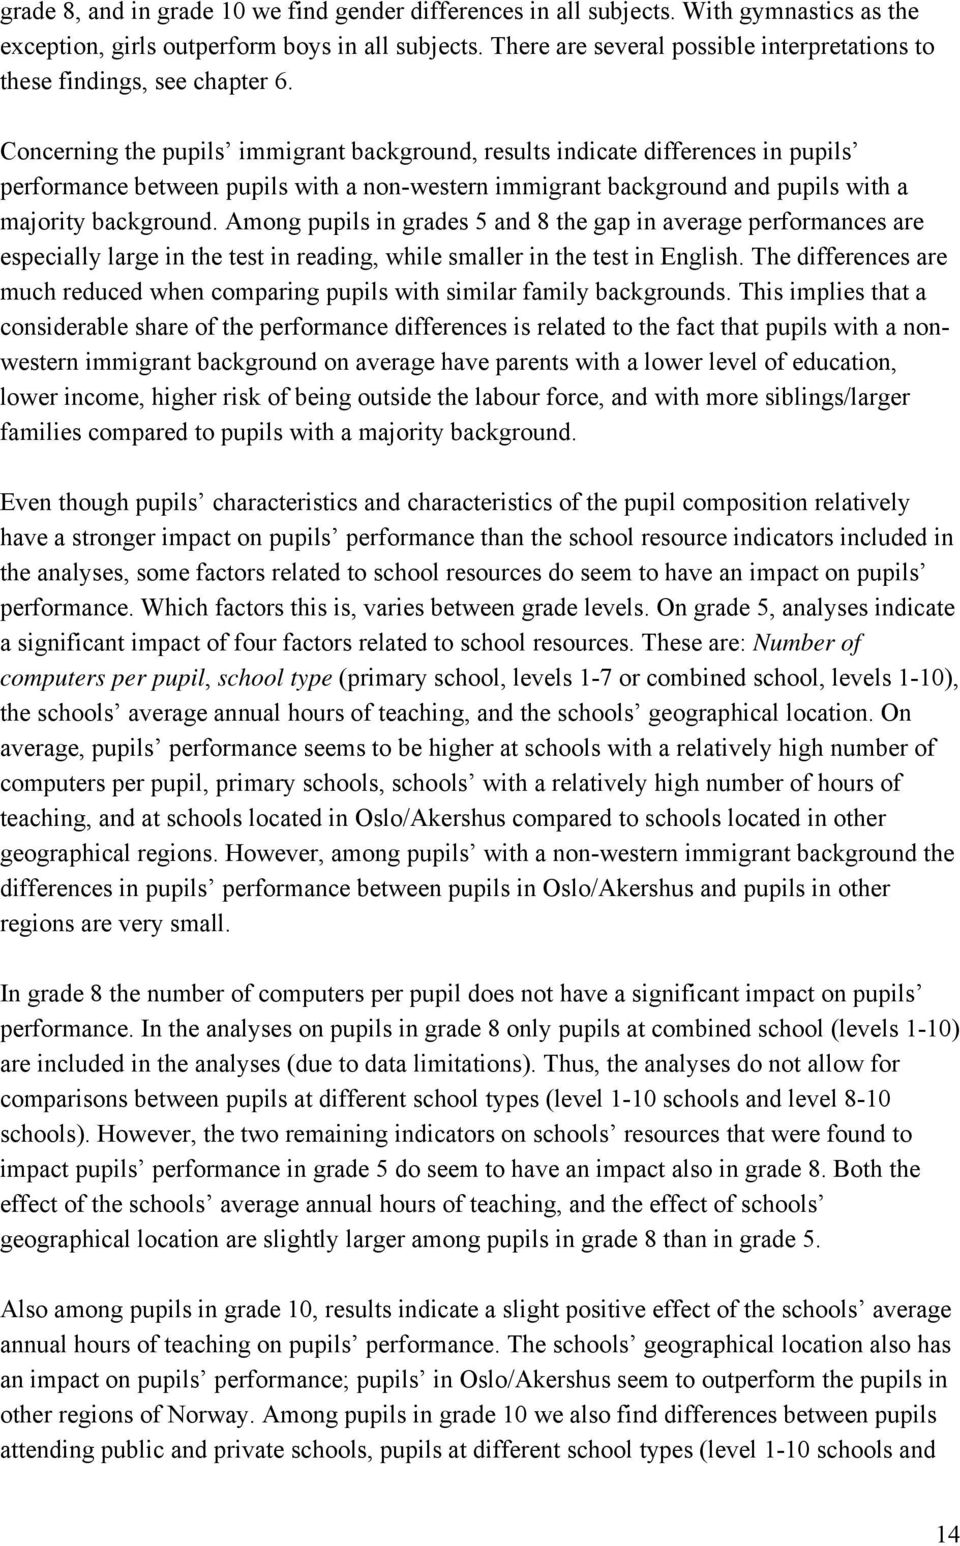 Concerning the pupils immigrant background, results indicate differences in pupils performance between pupils with a non-western immigrant background and pupils with a majority background.